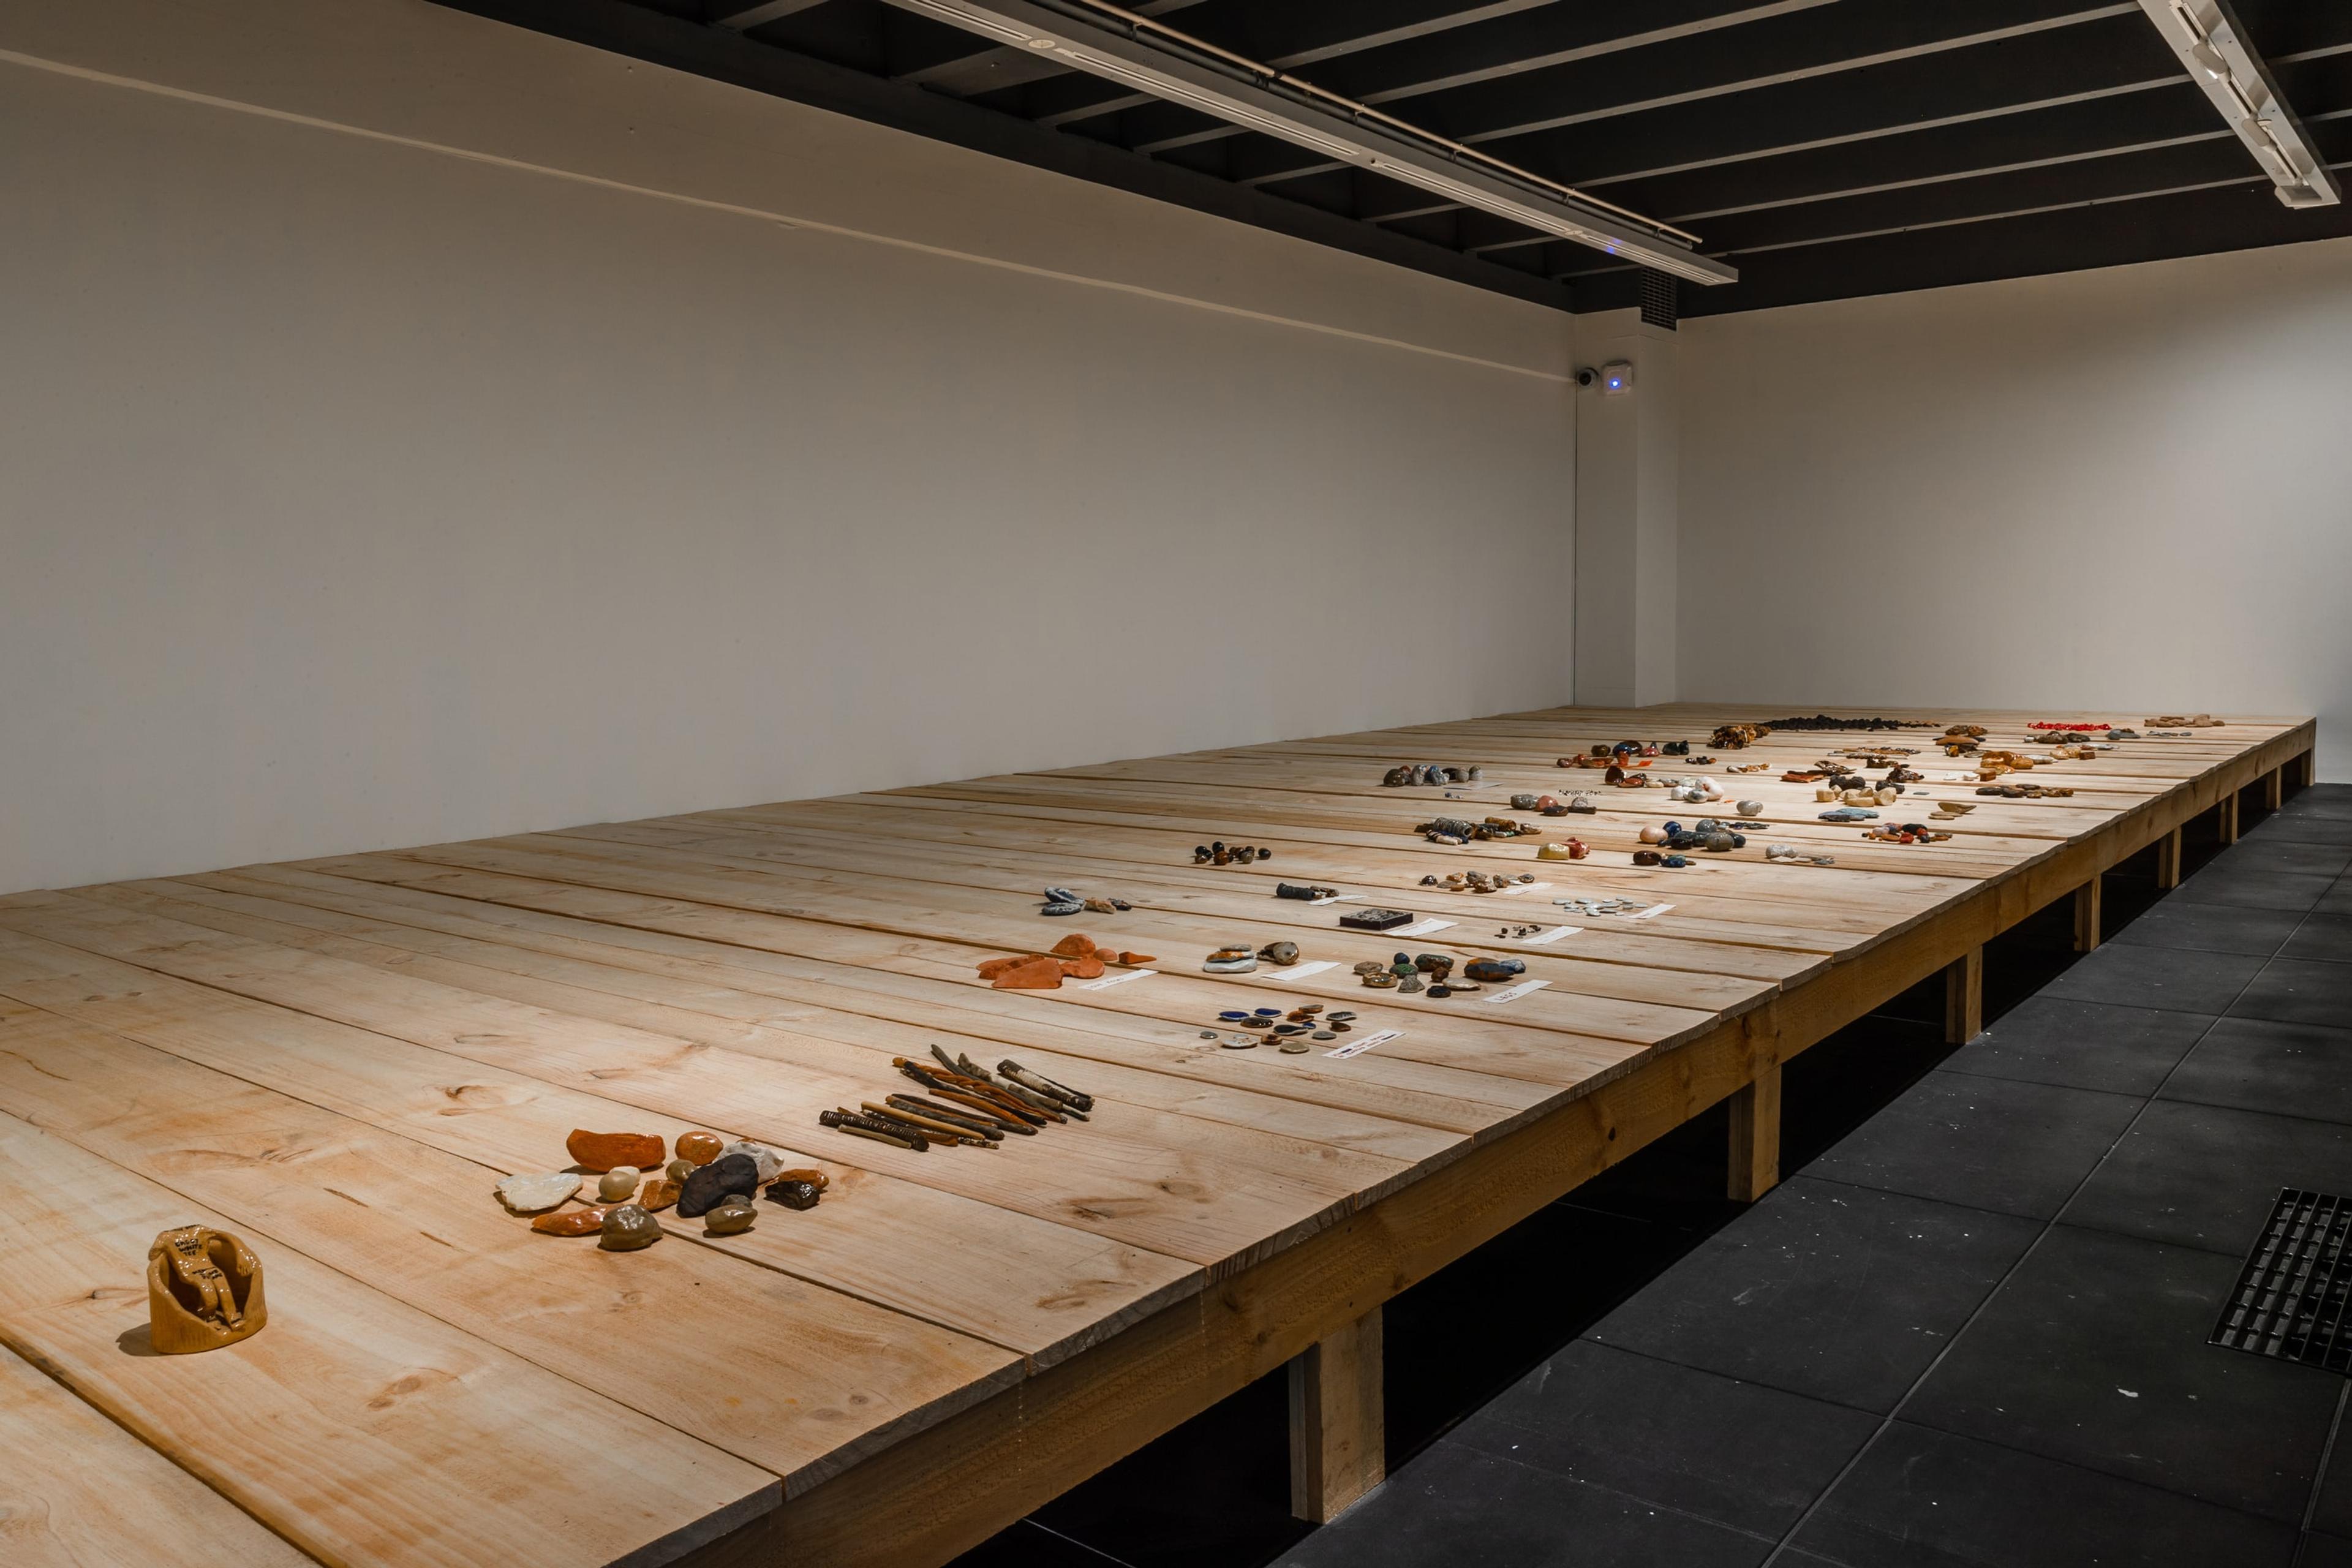 A wooden stage in a dimly lit white walled gallery, covered with groups of small objects